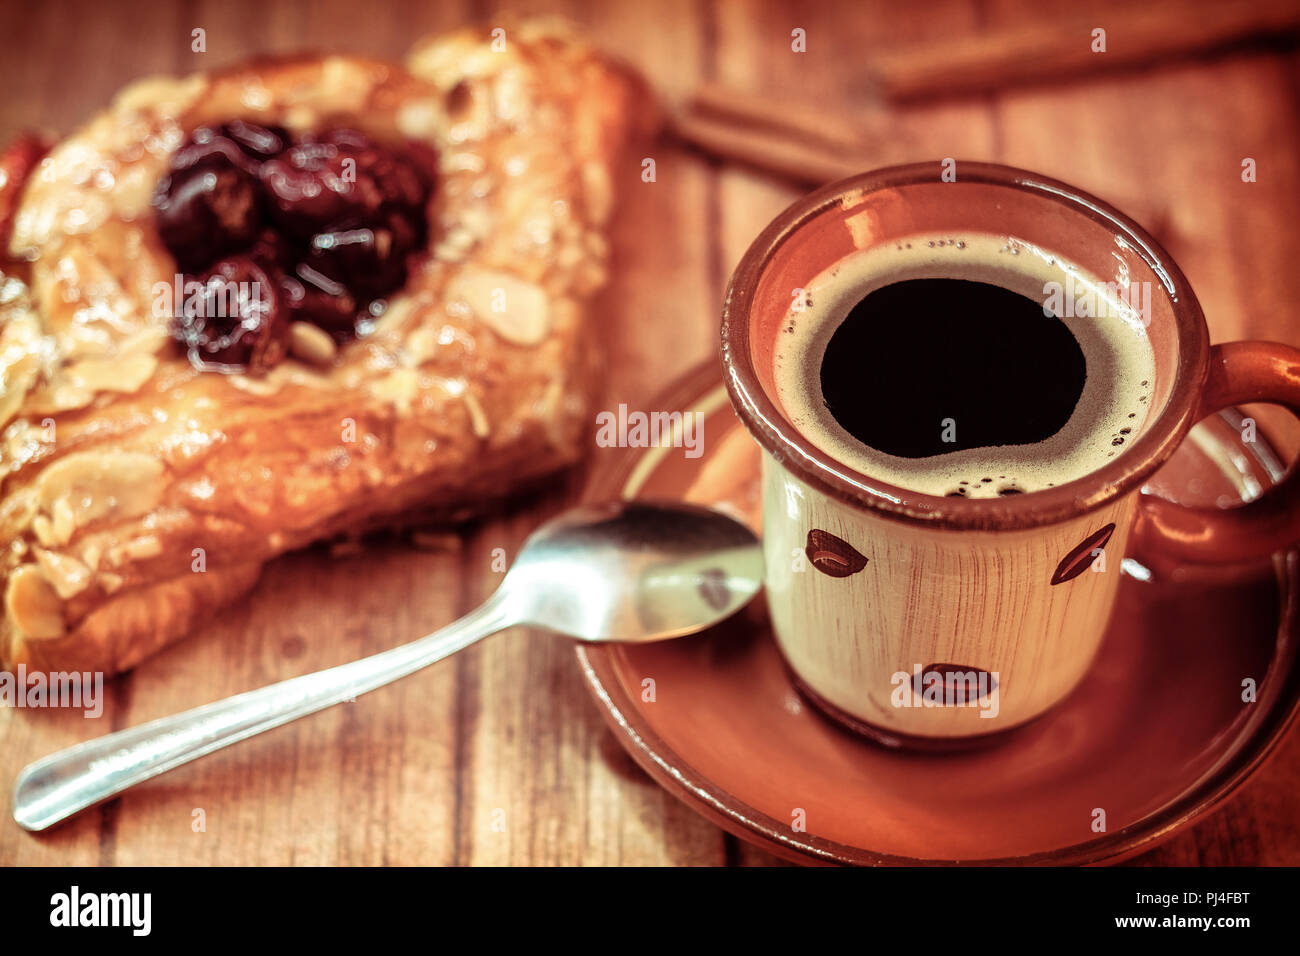 Coffee and croissant bread as a coffee break Stock Photo